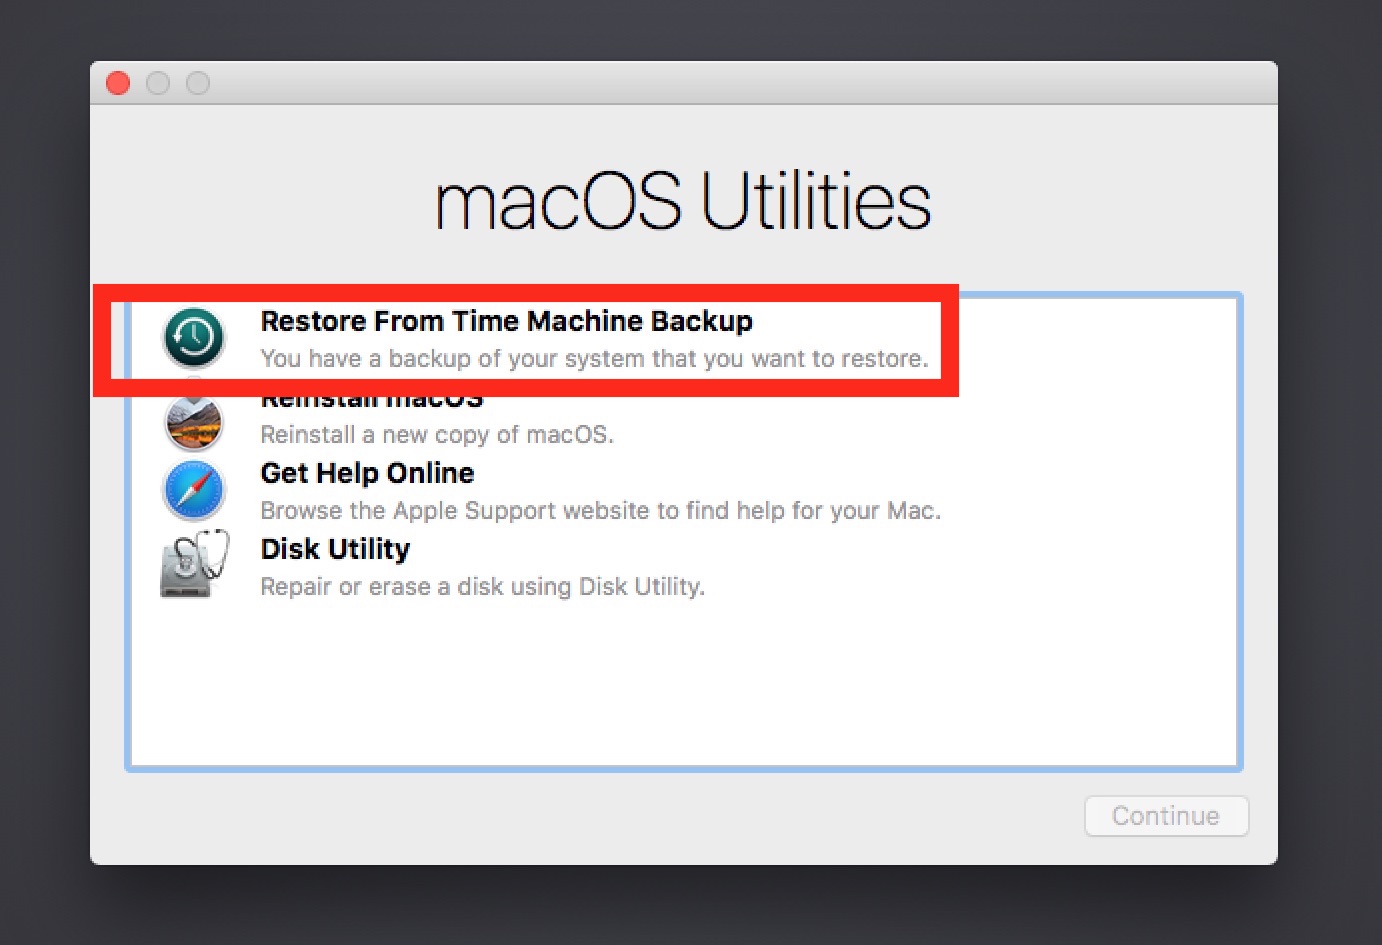 time machine help for restoring notes on the mac